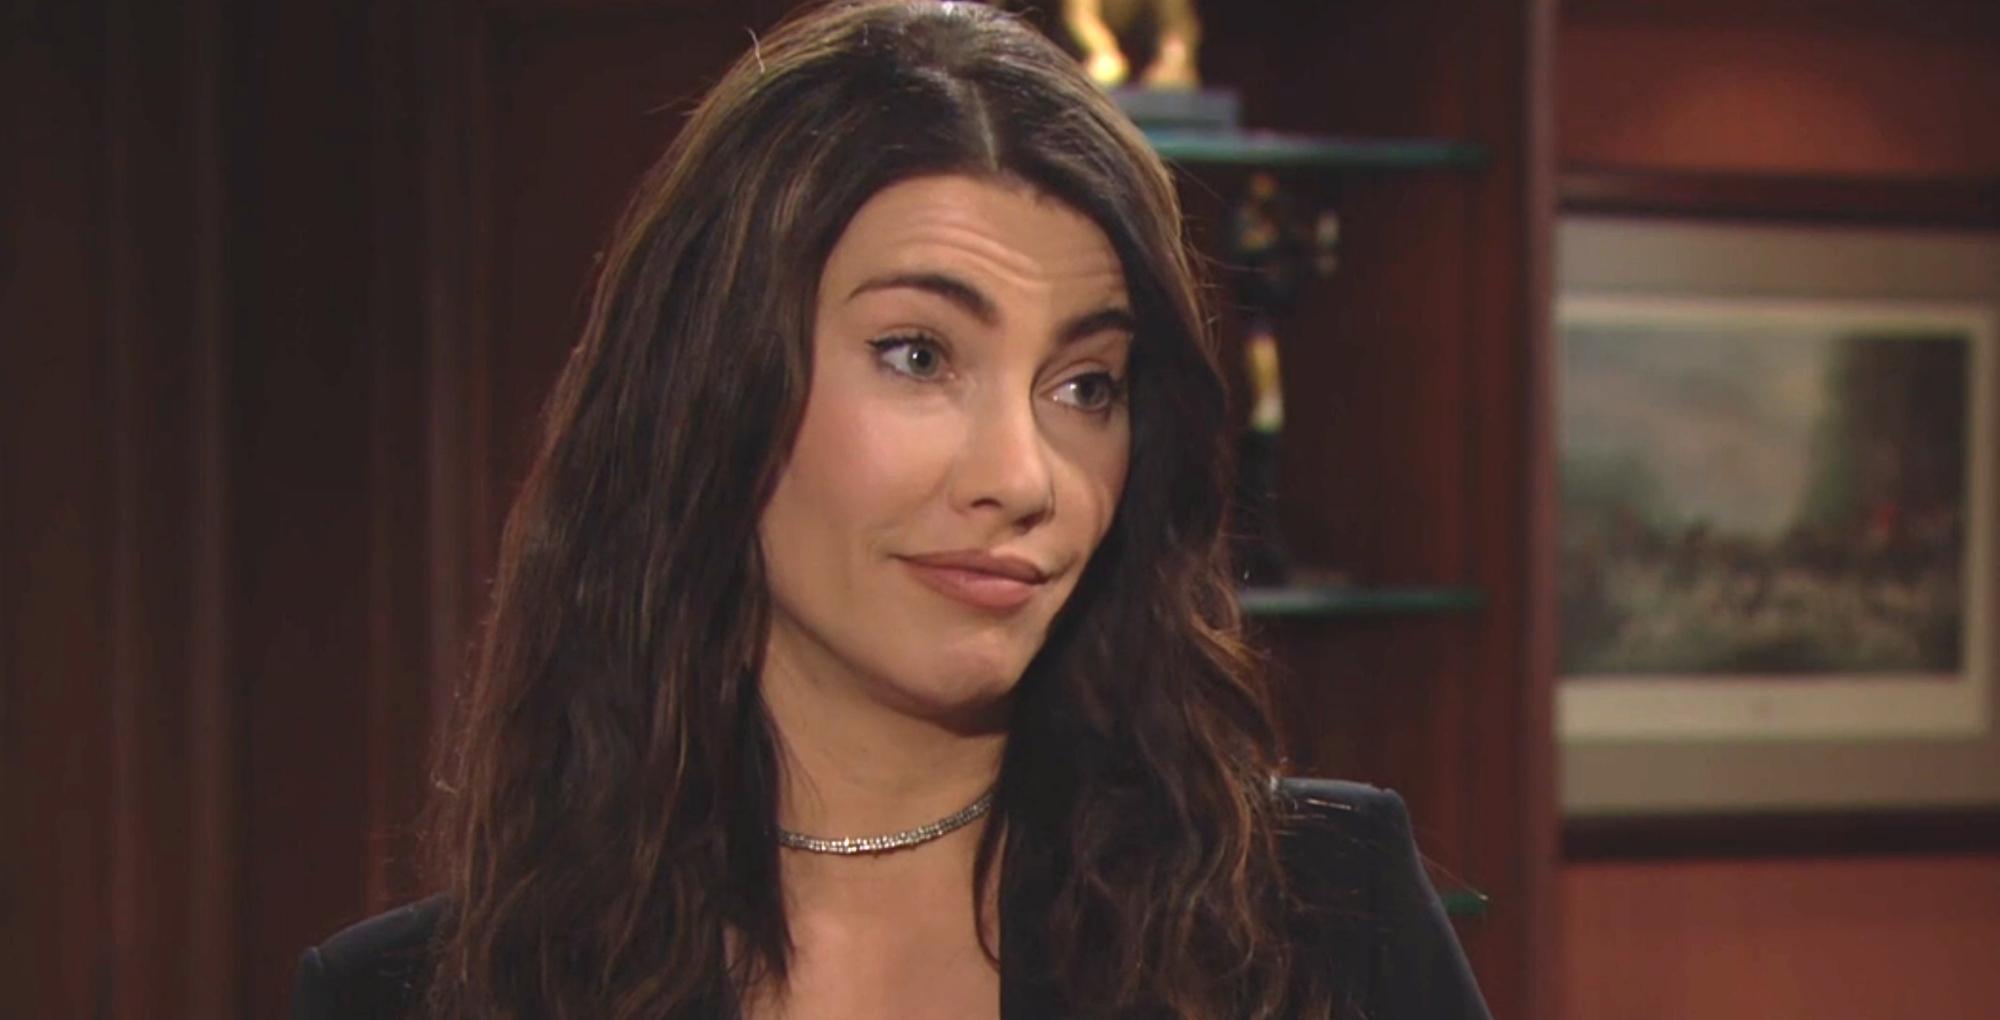 the bold and the beautiful recap for tuesday, march 21, 2023 steffy forrester with quite the expression on her face.